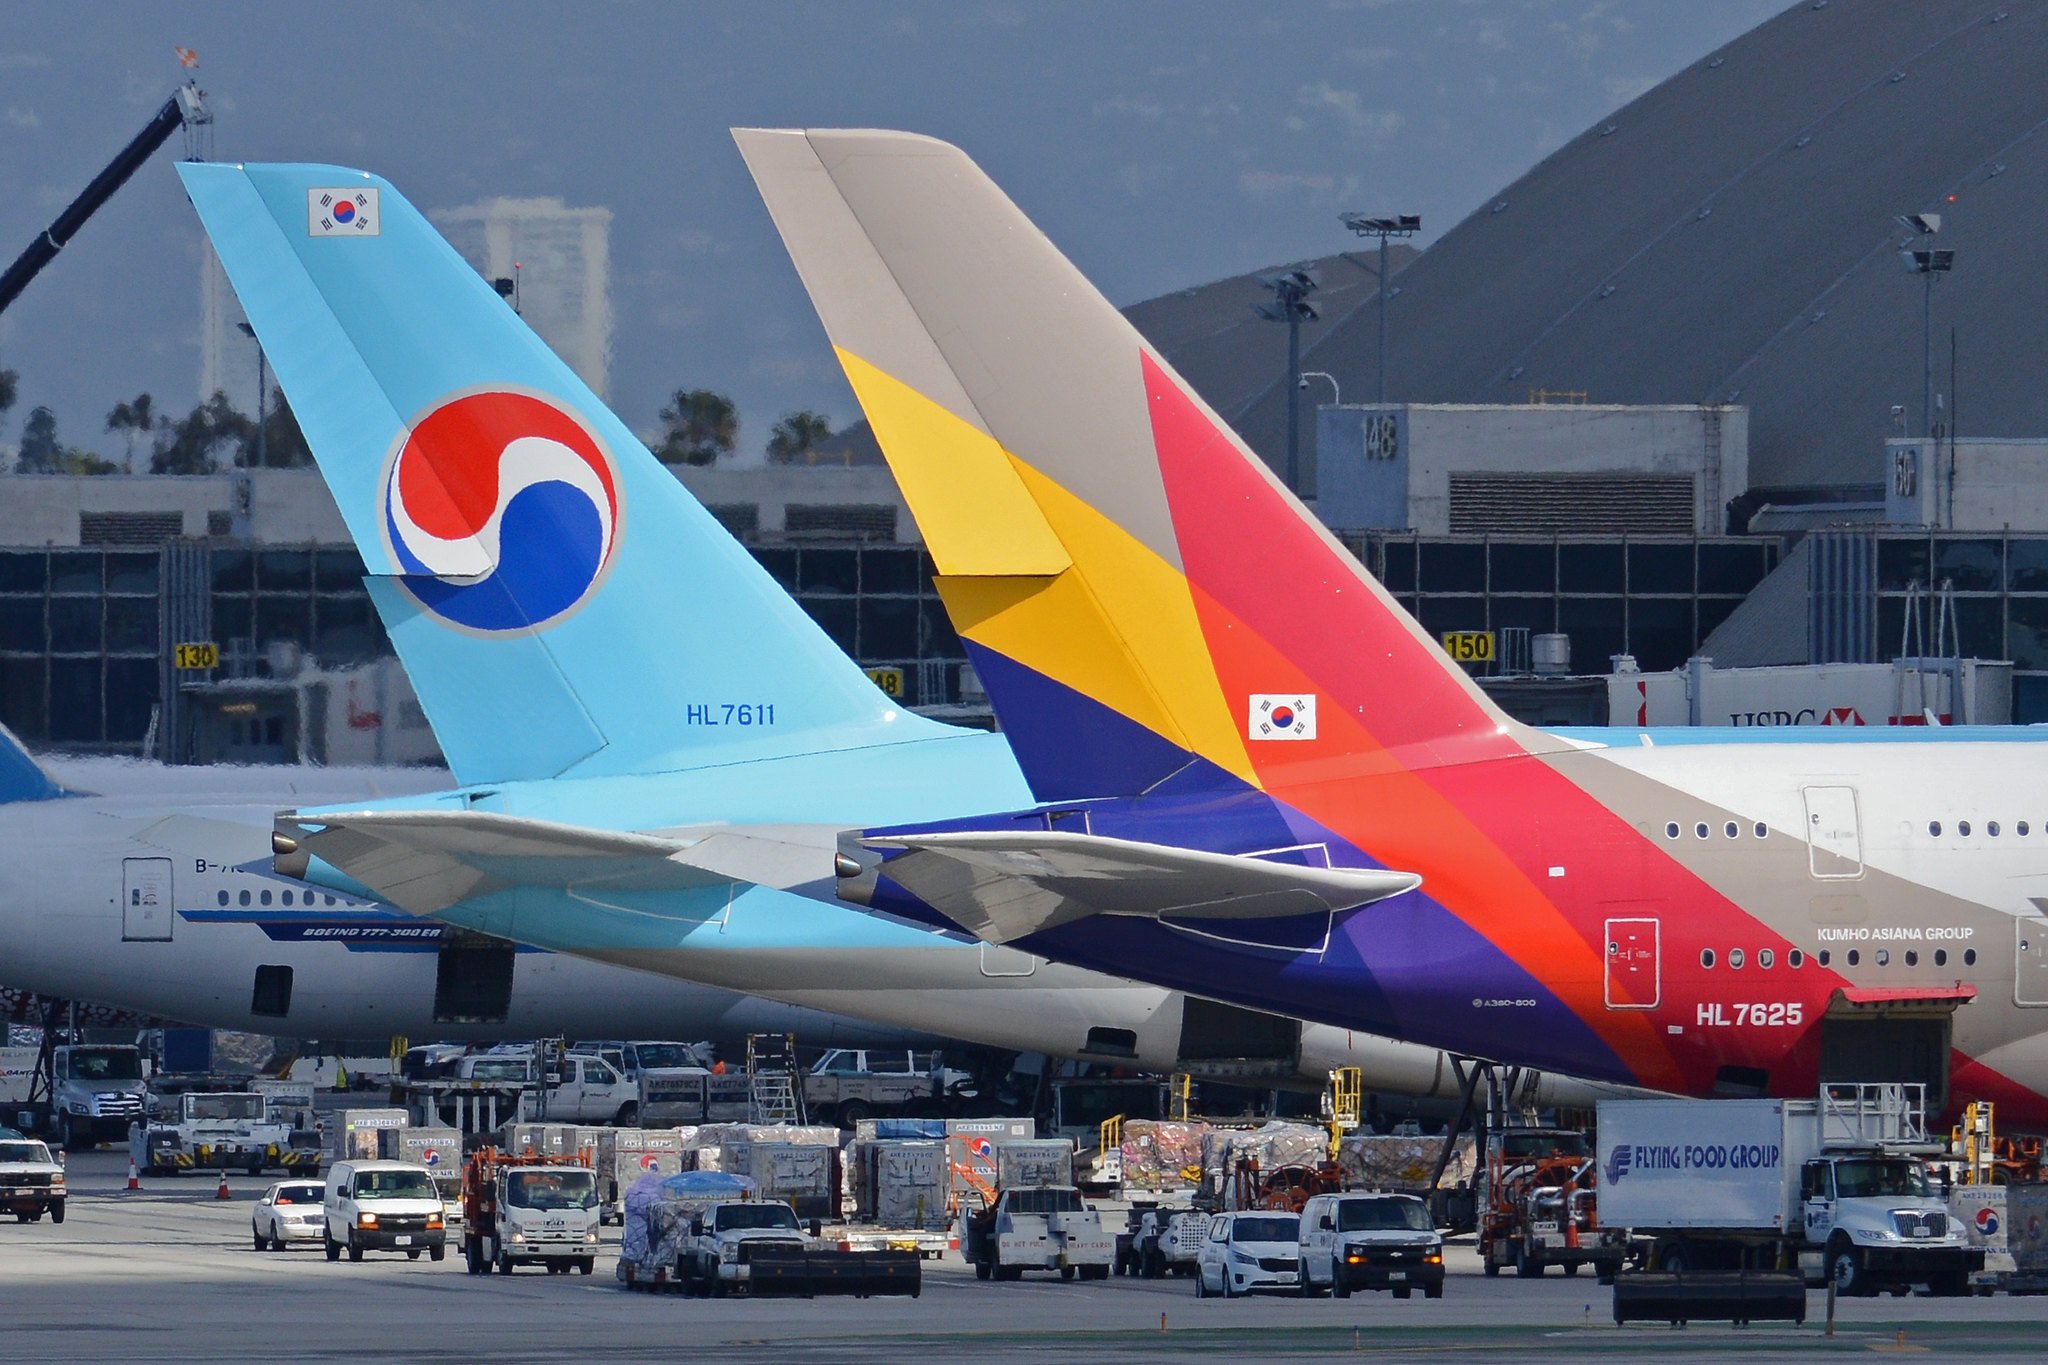 No Objection  From  Japan's  Fair Trade Commission  As  It  Completes  Review  Of  Korean Air's  Acquisition  Of  Asiana  Airlines.